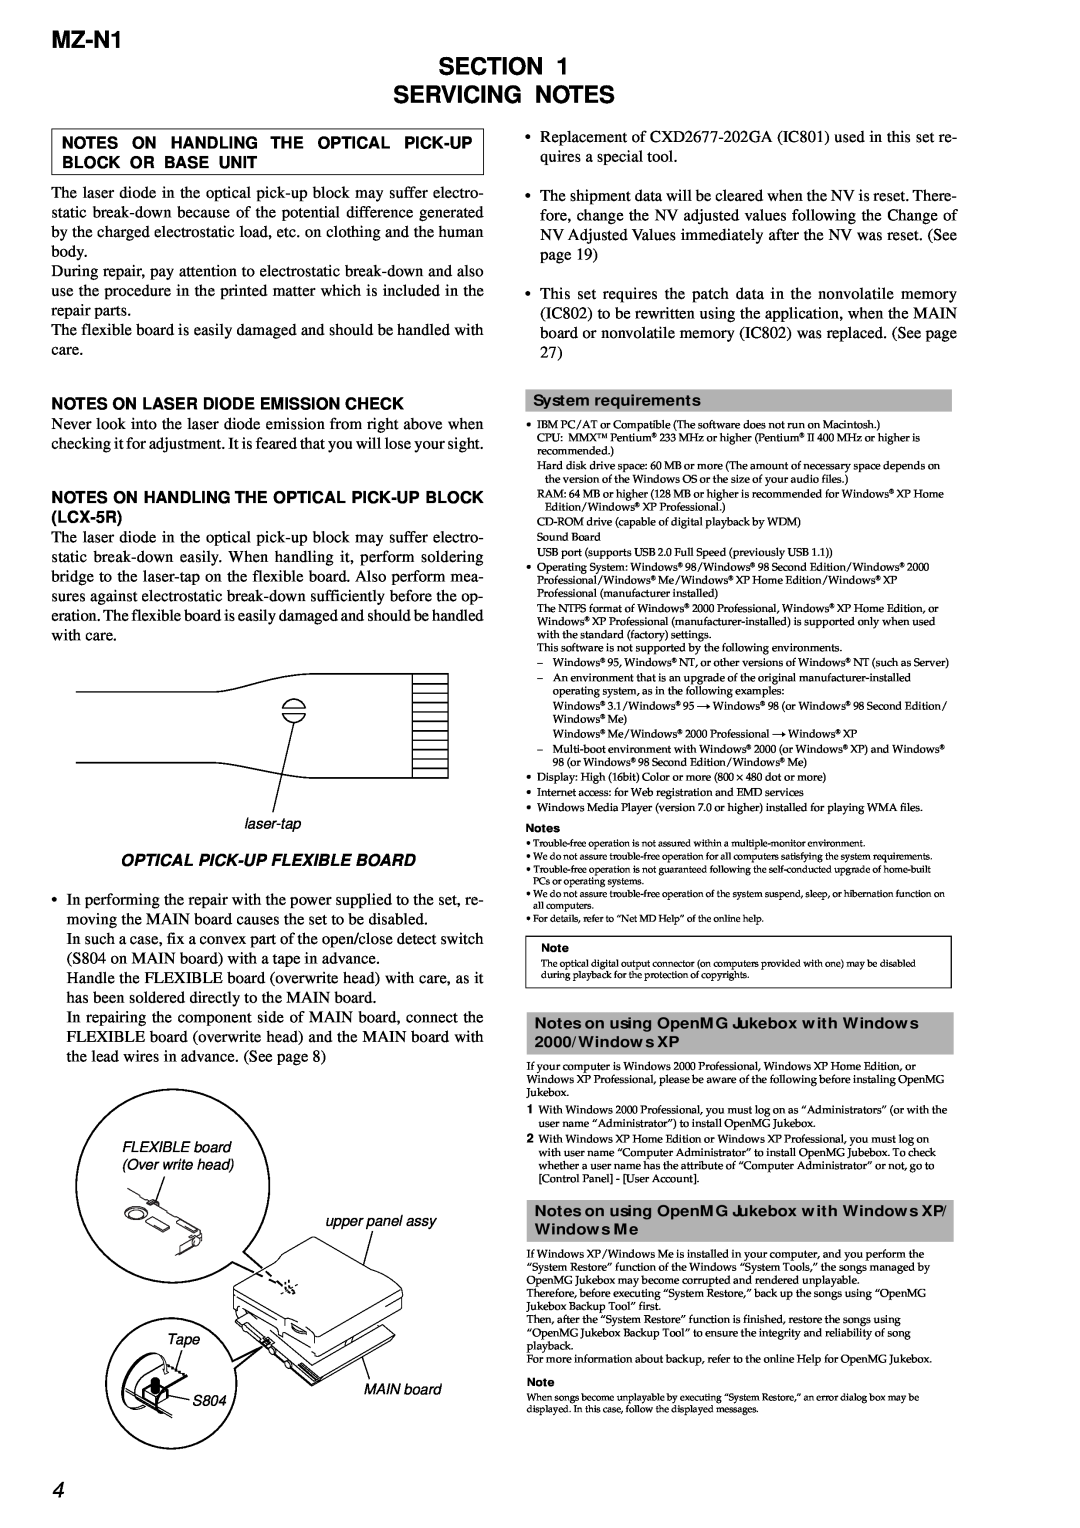 Sony service manual MZ-N1 SECTION SERVICING NOTES, Notes On Laser Diode Emission Check, Optical Pick-Upflexible Board 